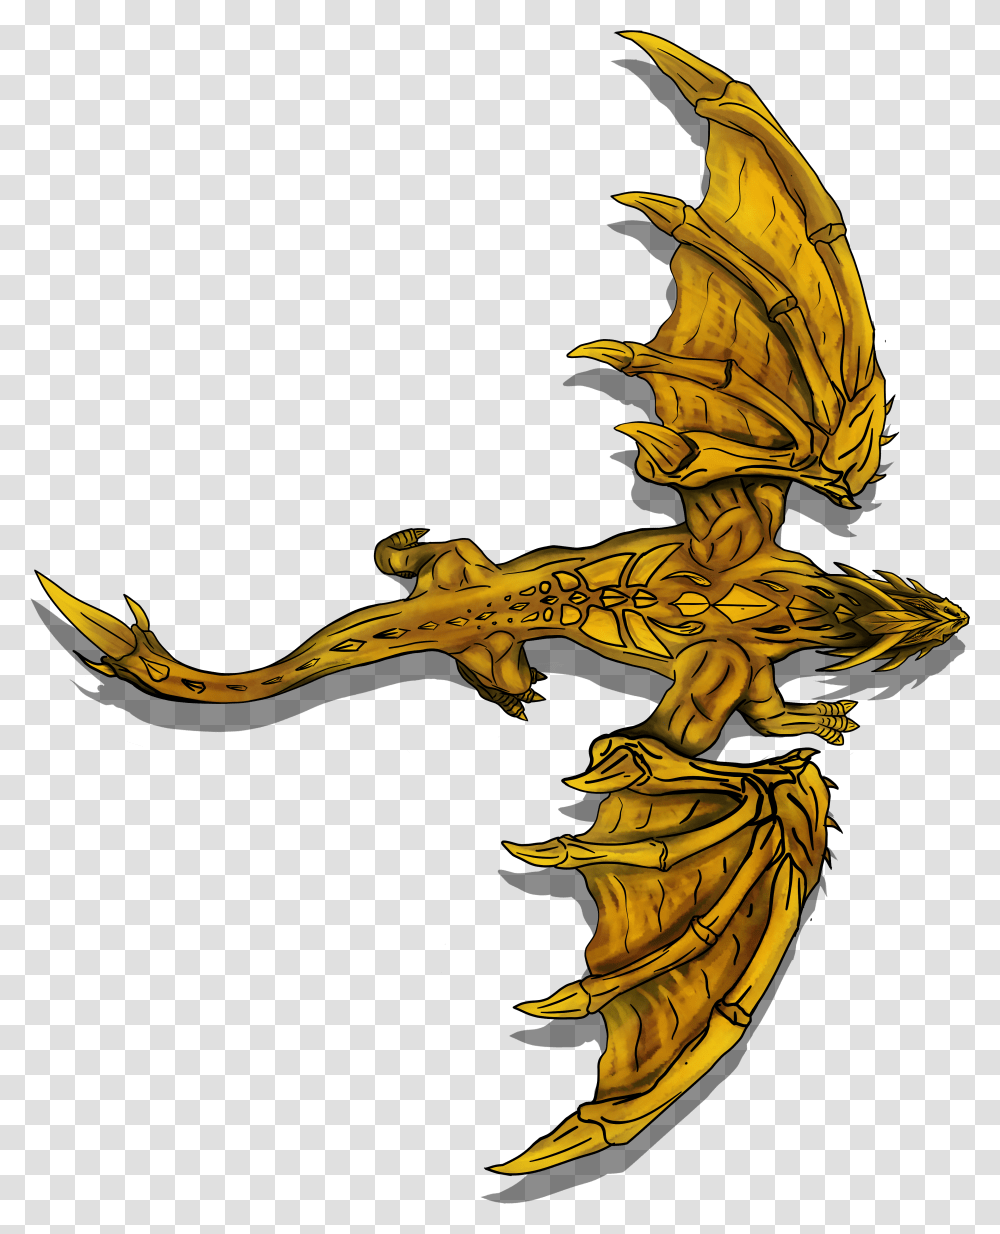 Roll 20 Dragon Token Download Gold Dragon Roll Transparent Png